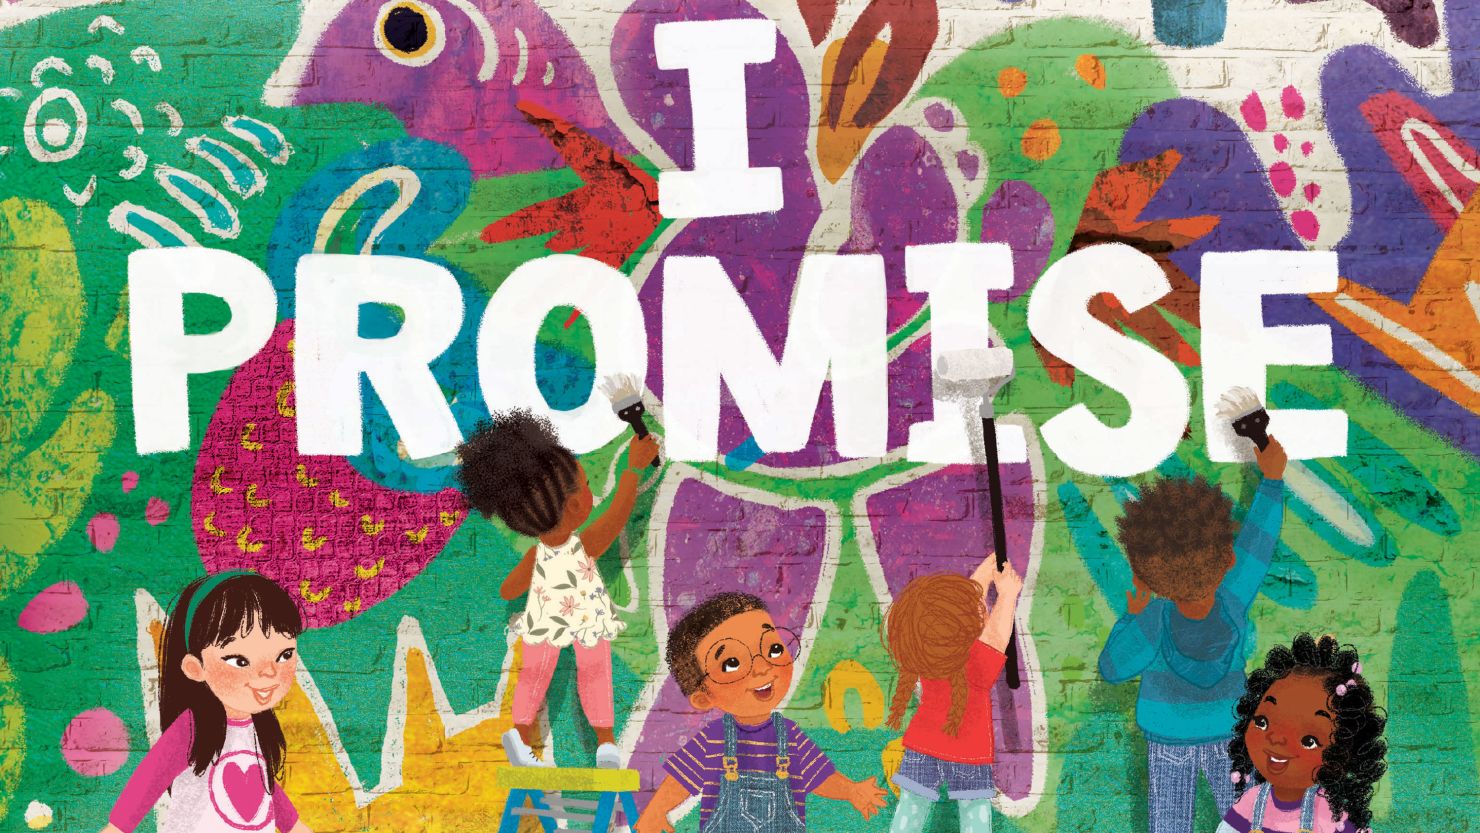 LeBron James' debut children's book will be released on August 11, 2020.